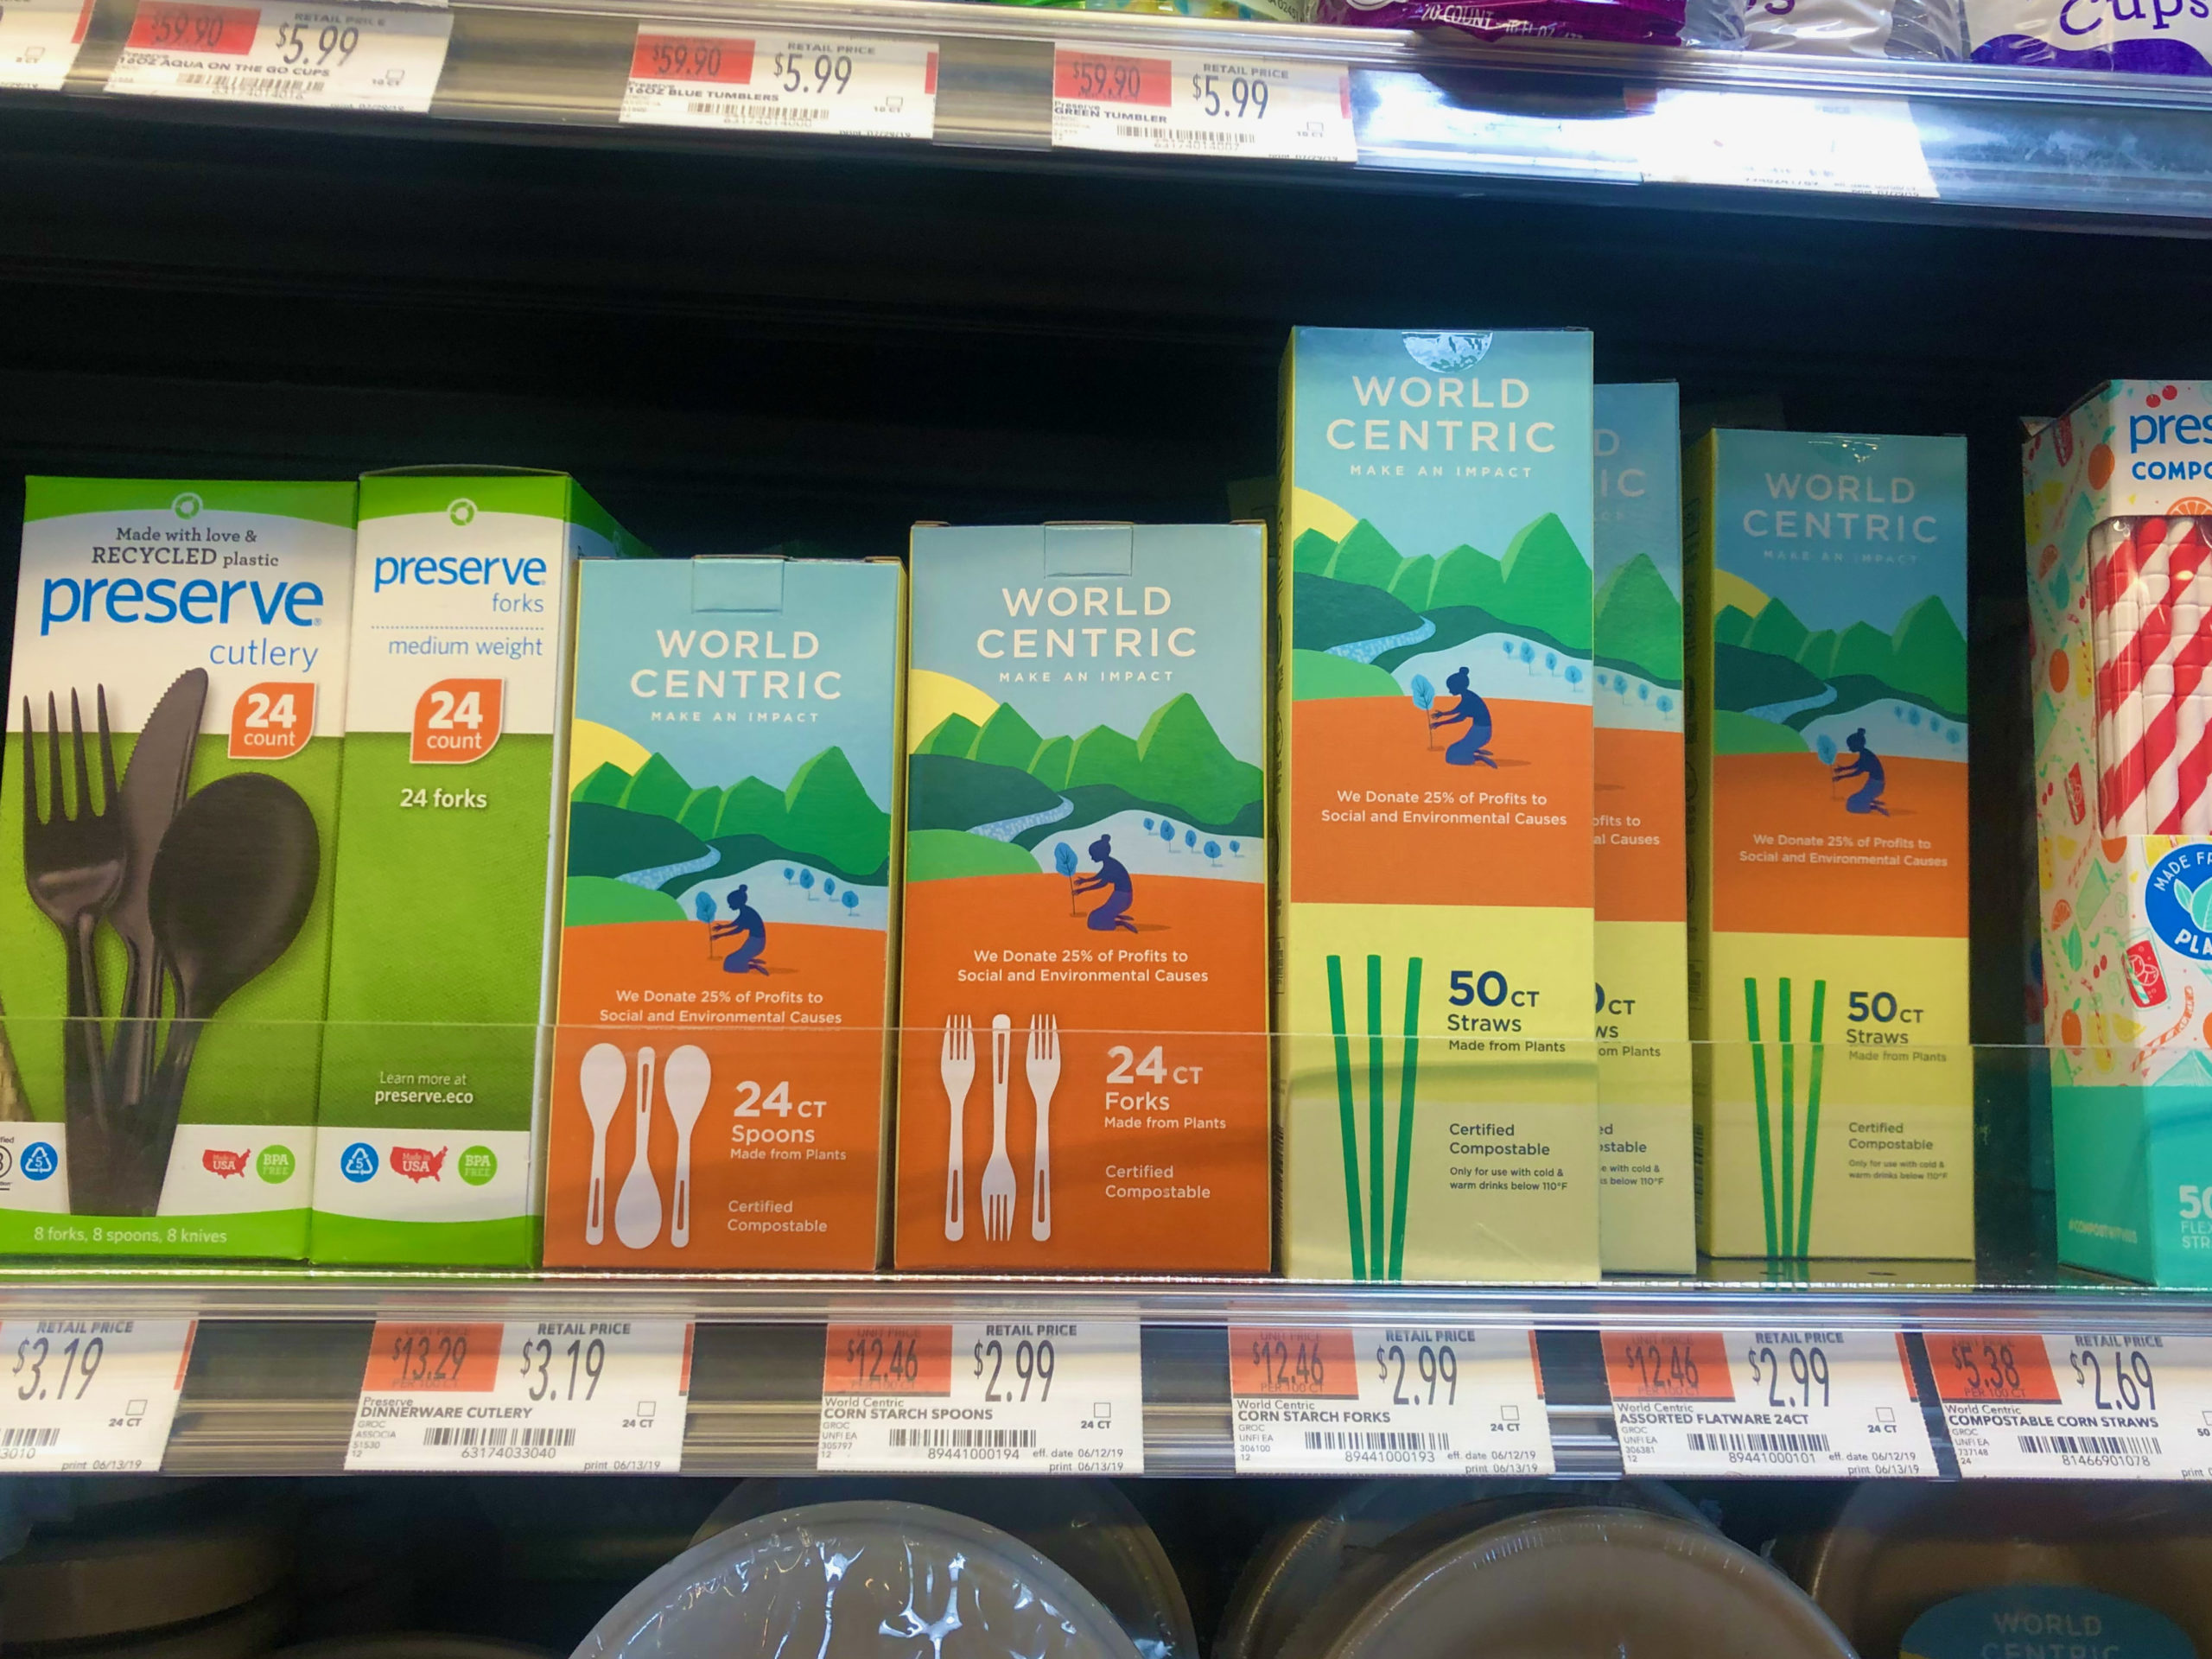 These straws and utensils are certified compostable, but only in a certified facility. They won't degrade in the trash or compost bin and can't be recycled. 